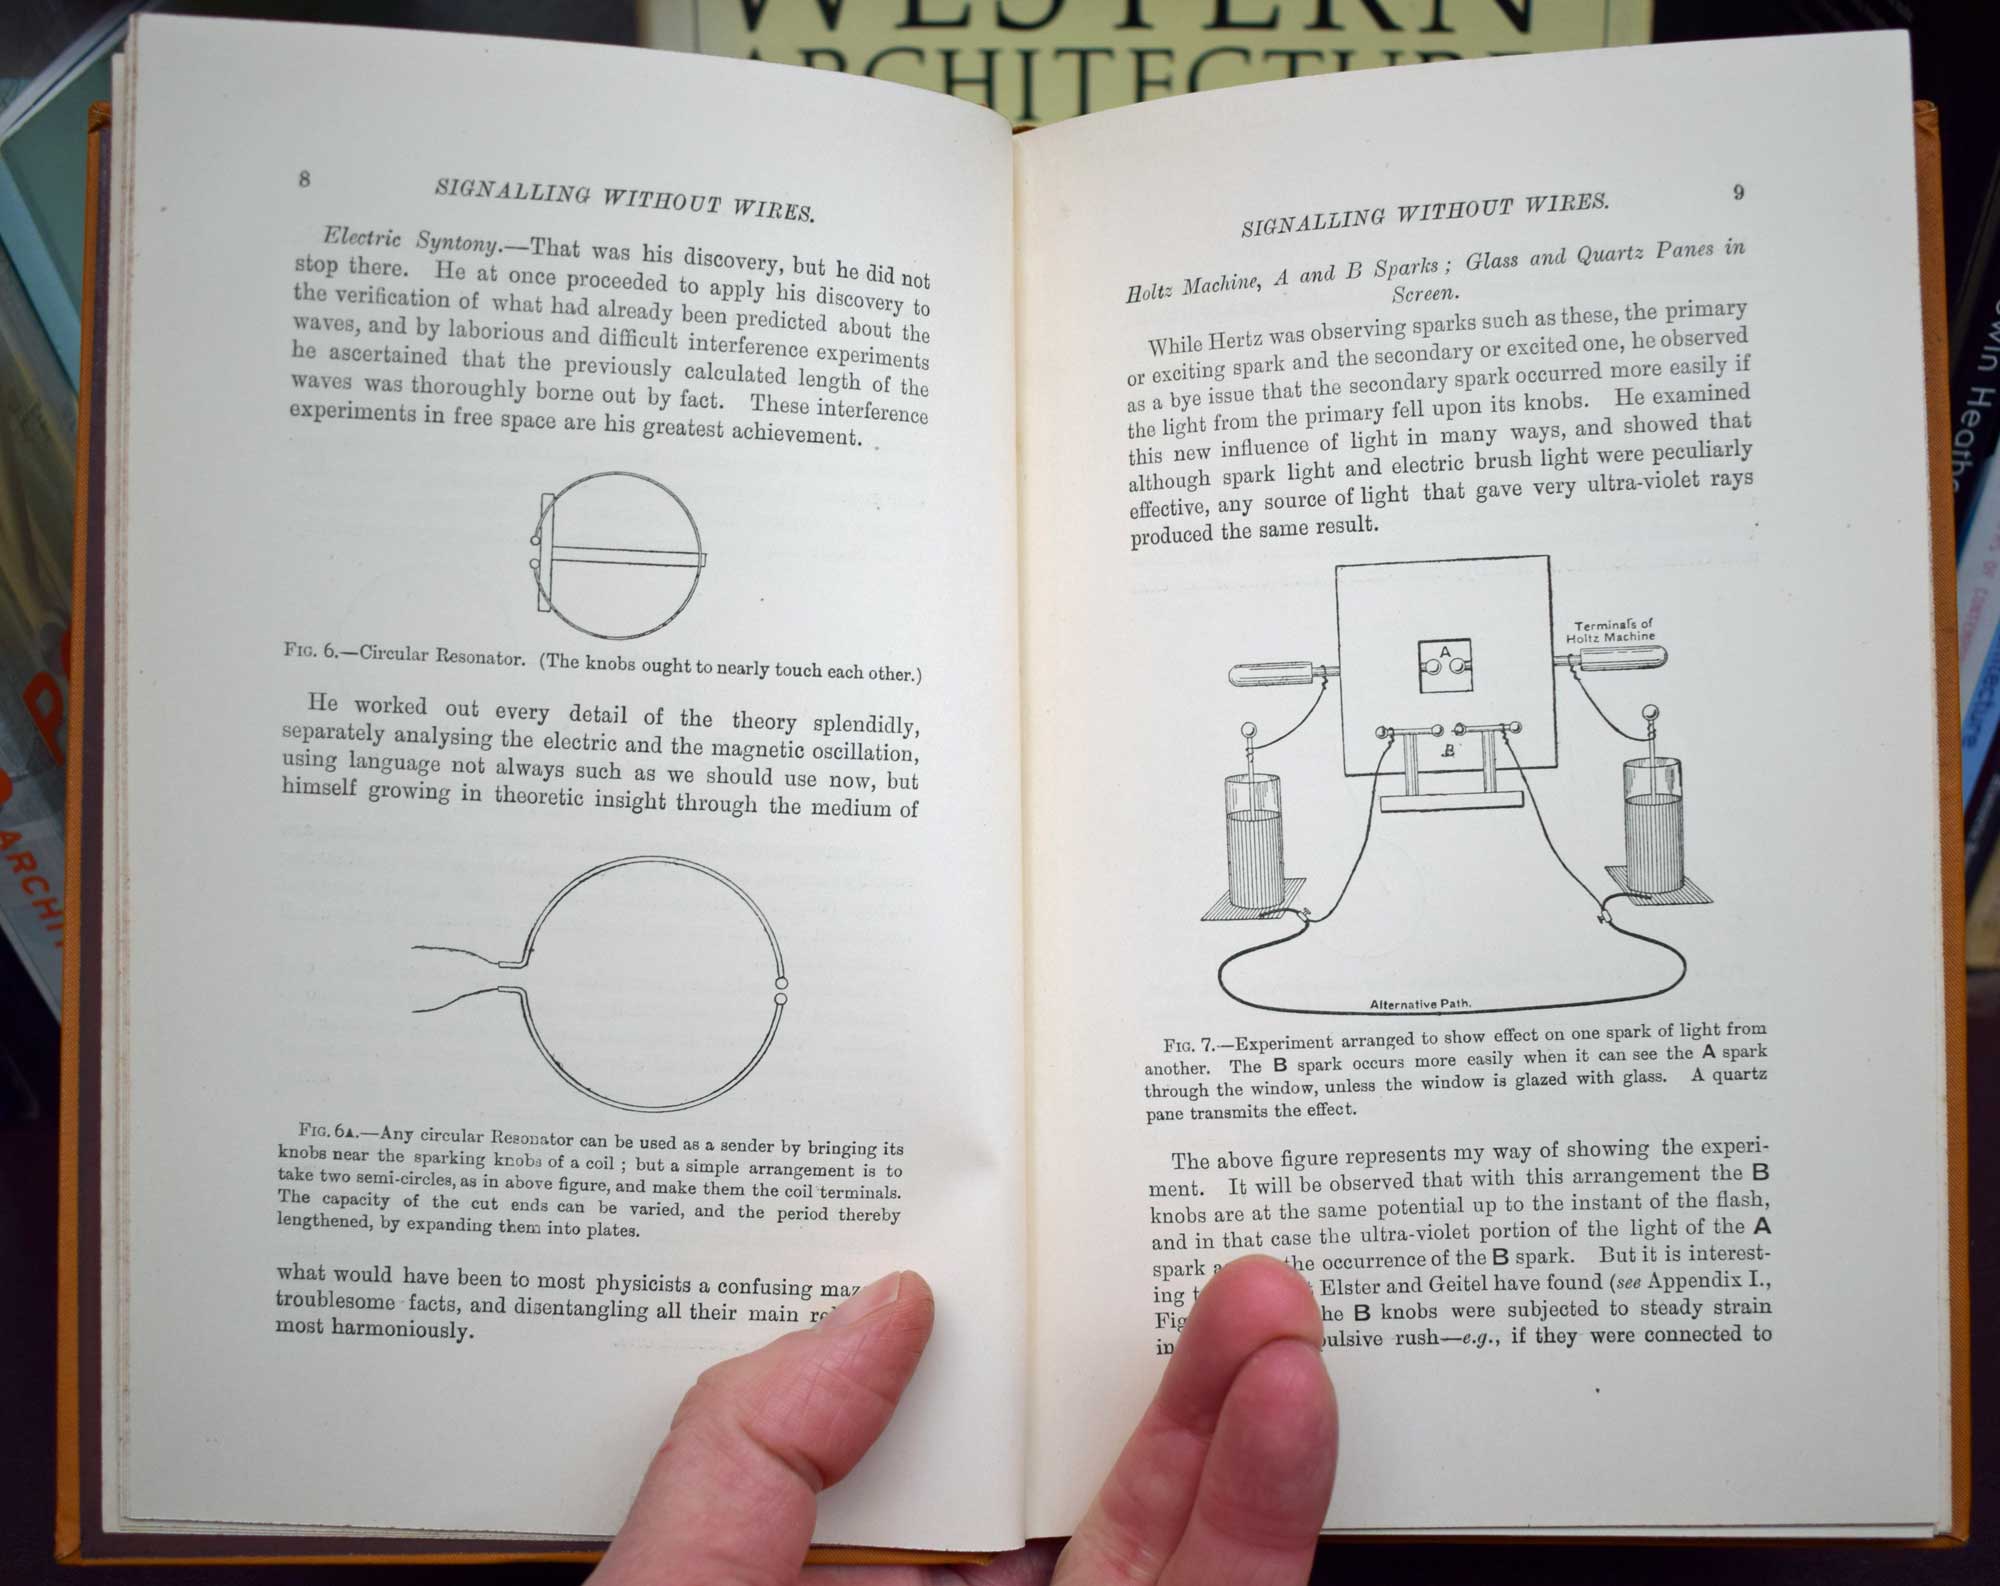 Signalling Across Space Without Wire. Being a Description of the Work of Hertz & His Successors. Author's copy with alterations.